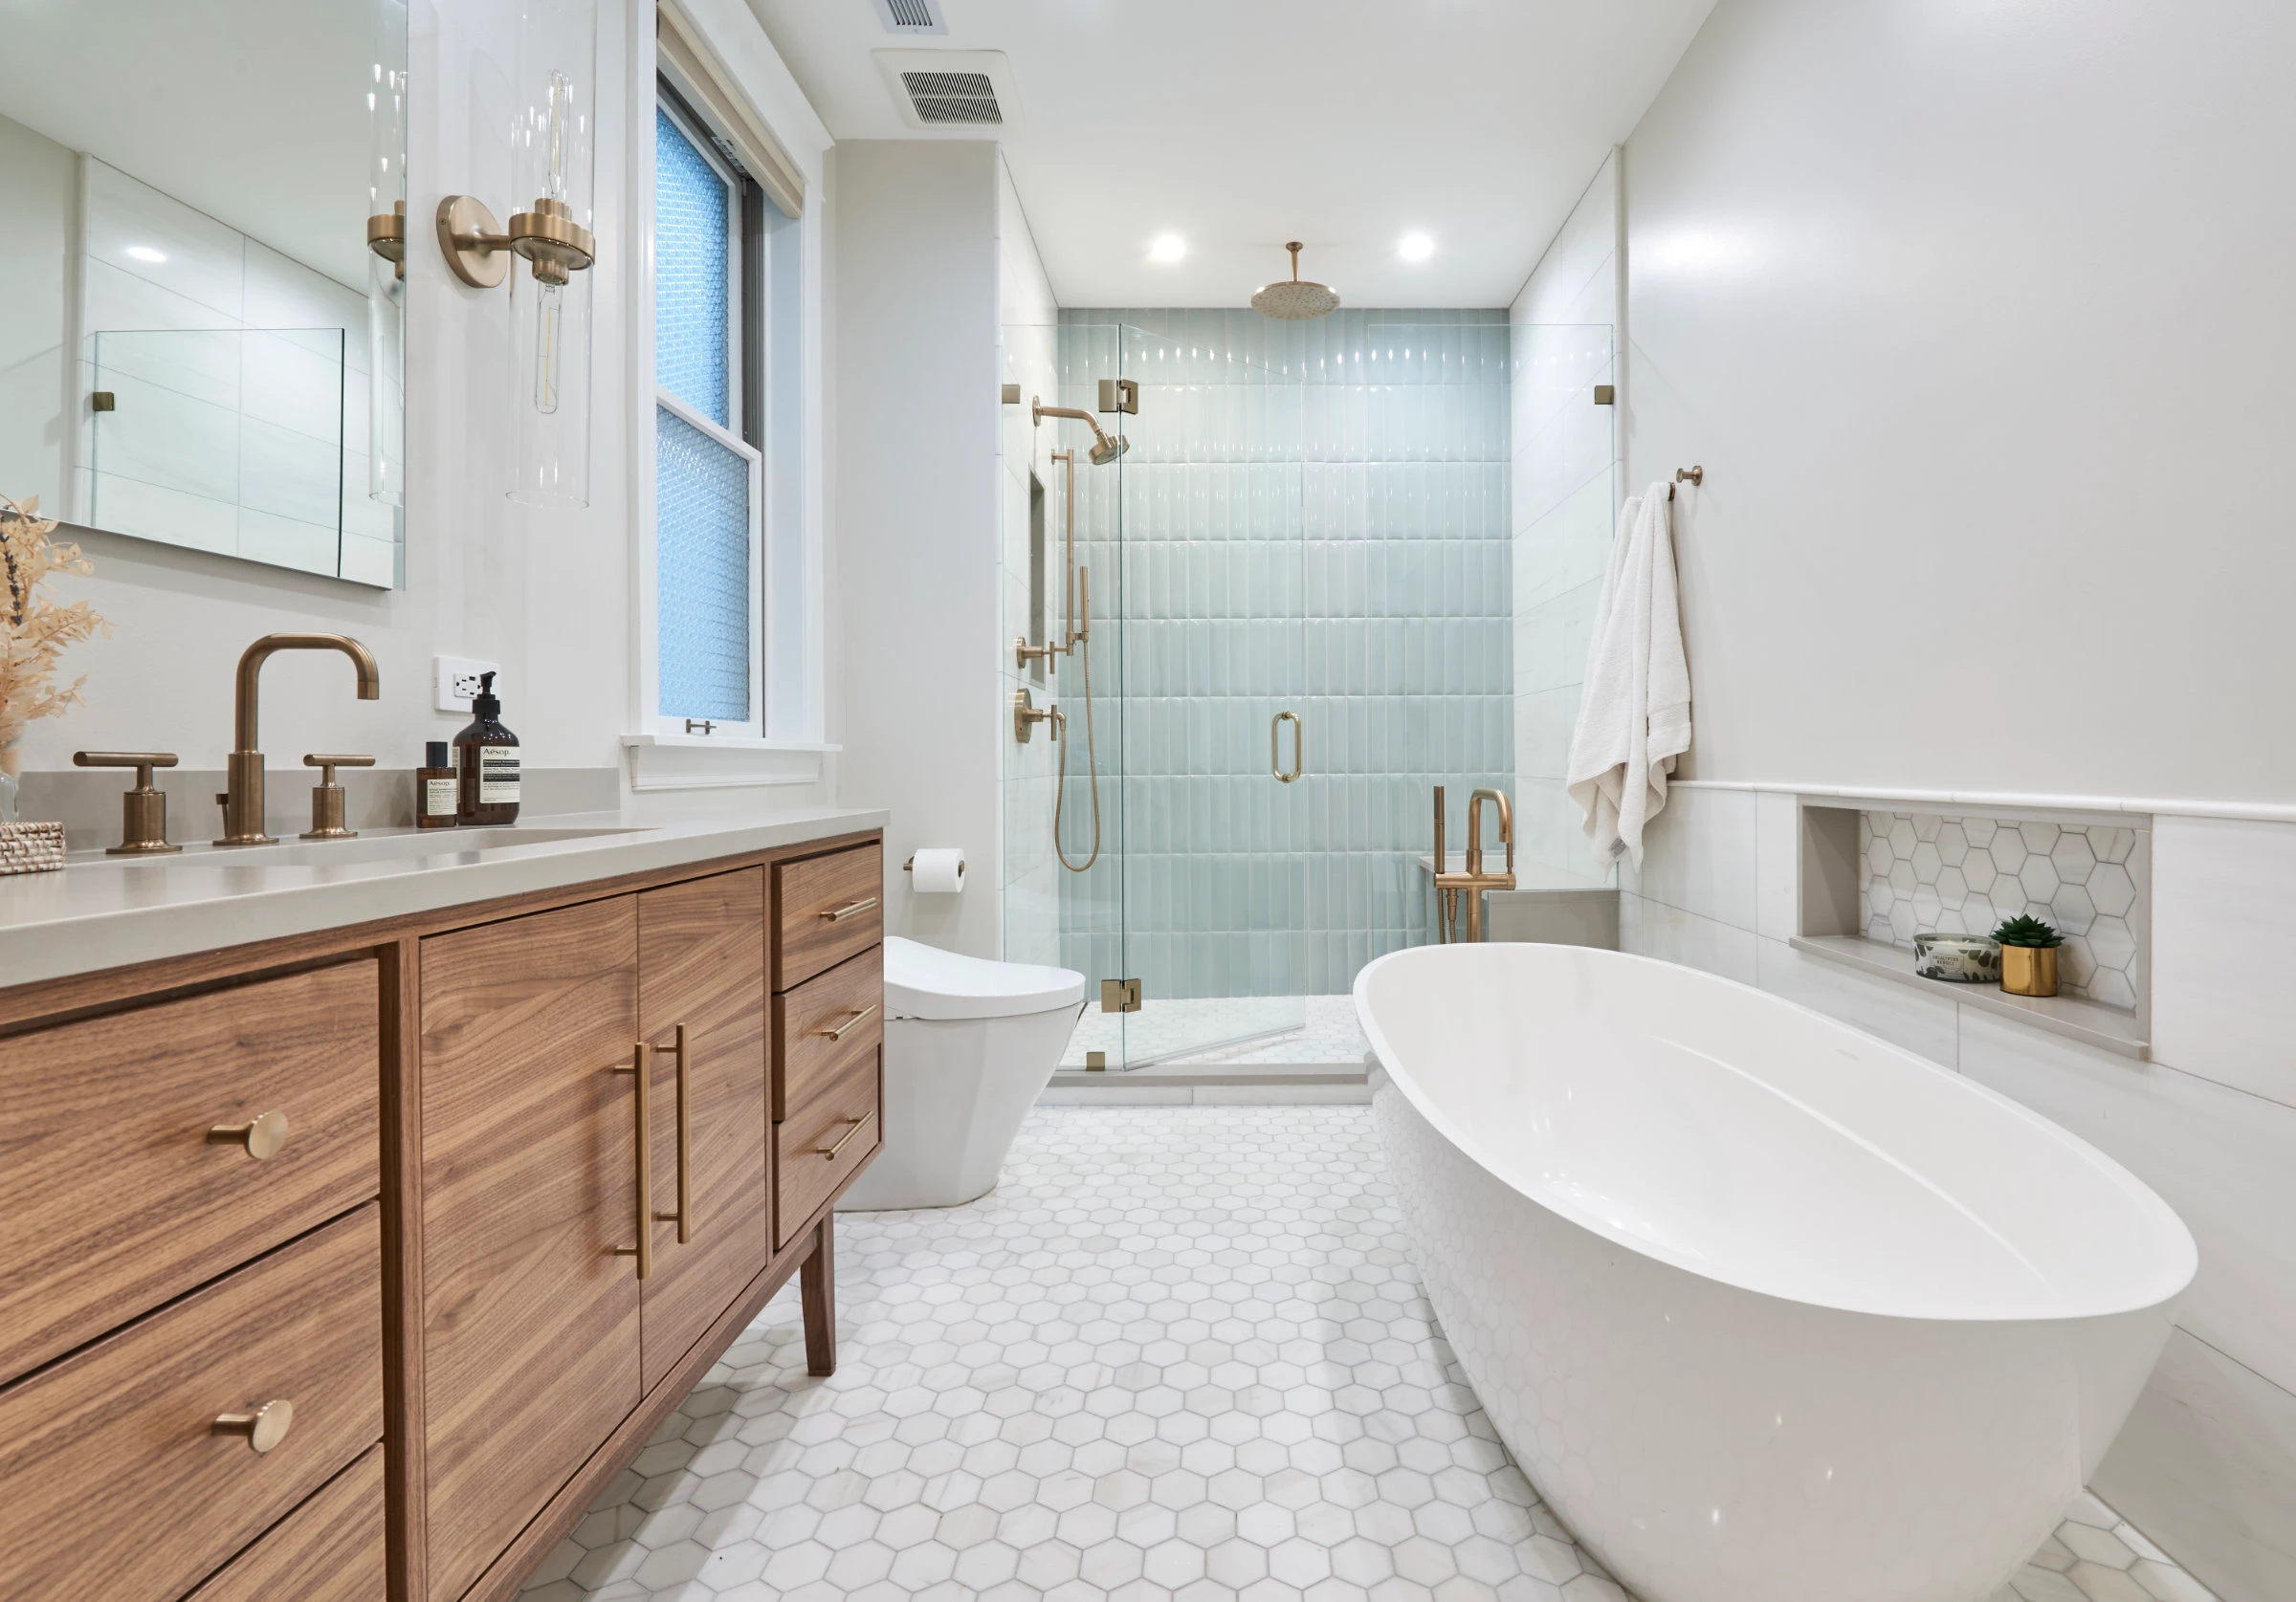 Upscale beautiful bathroom remodel with walk-in shower and freestanding tub